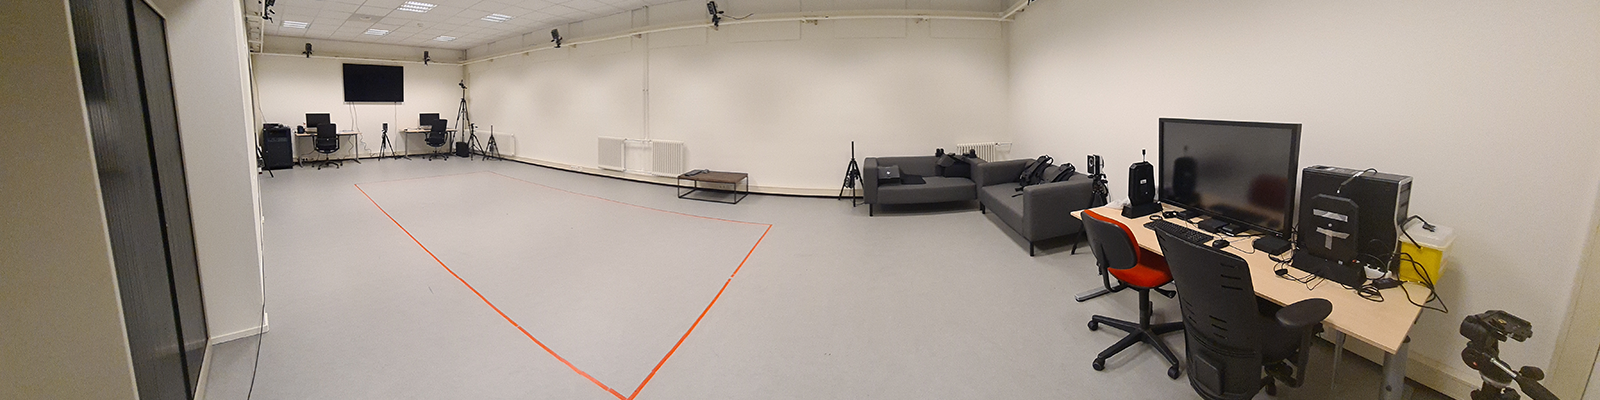 Panoramic overview of the motion capture and virtual reality lab